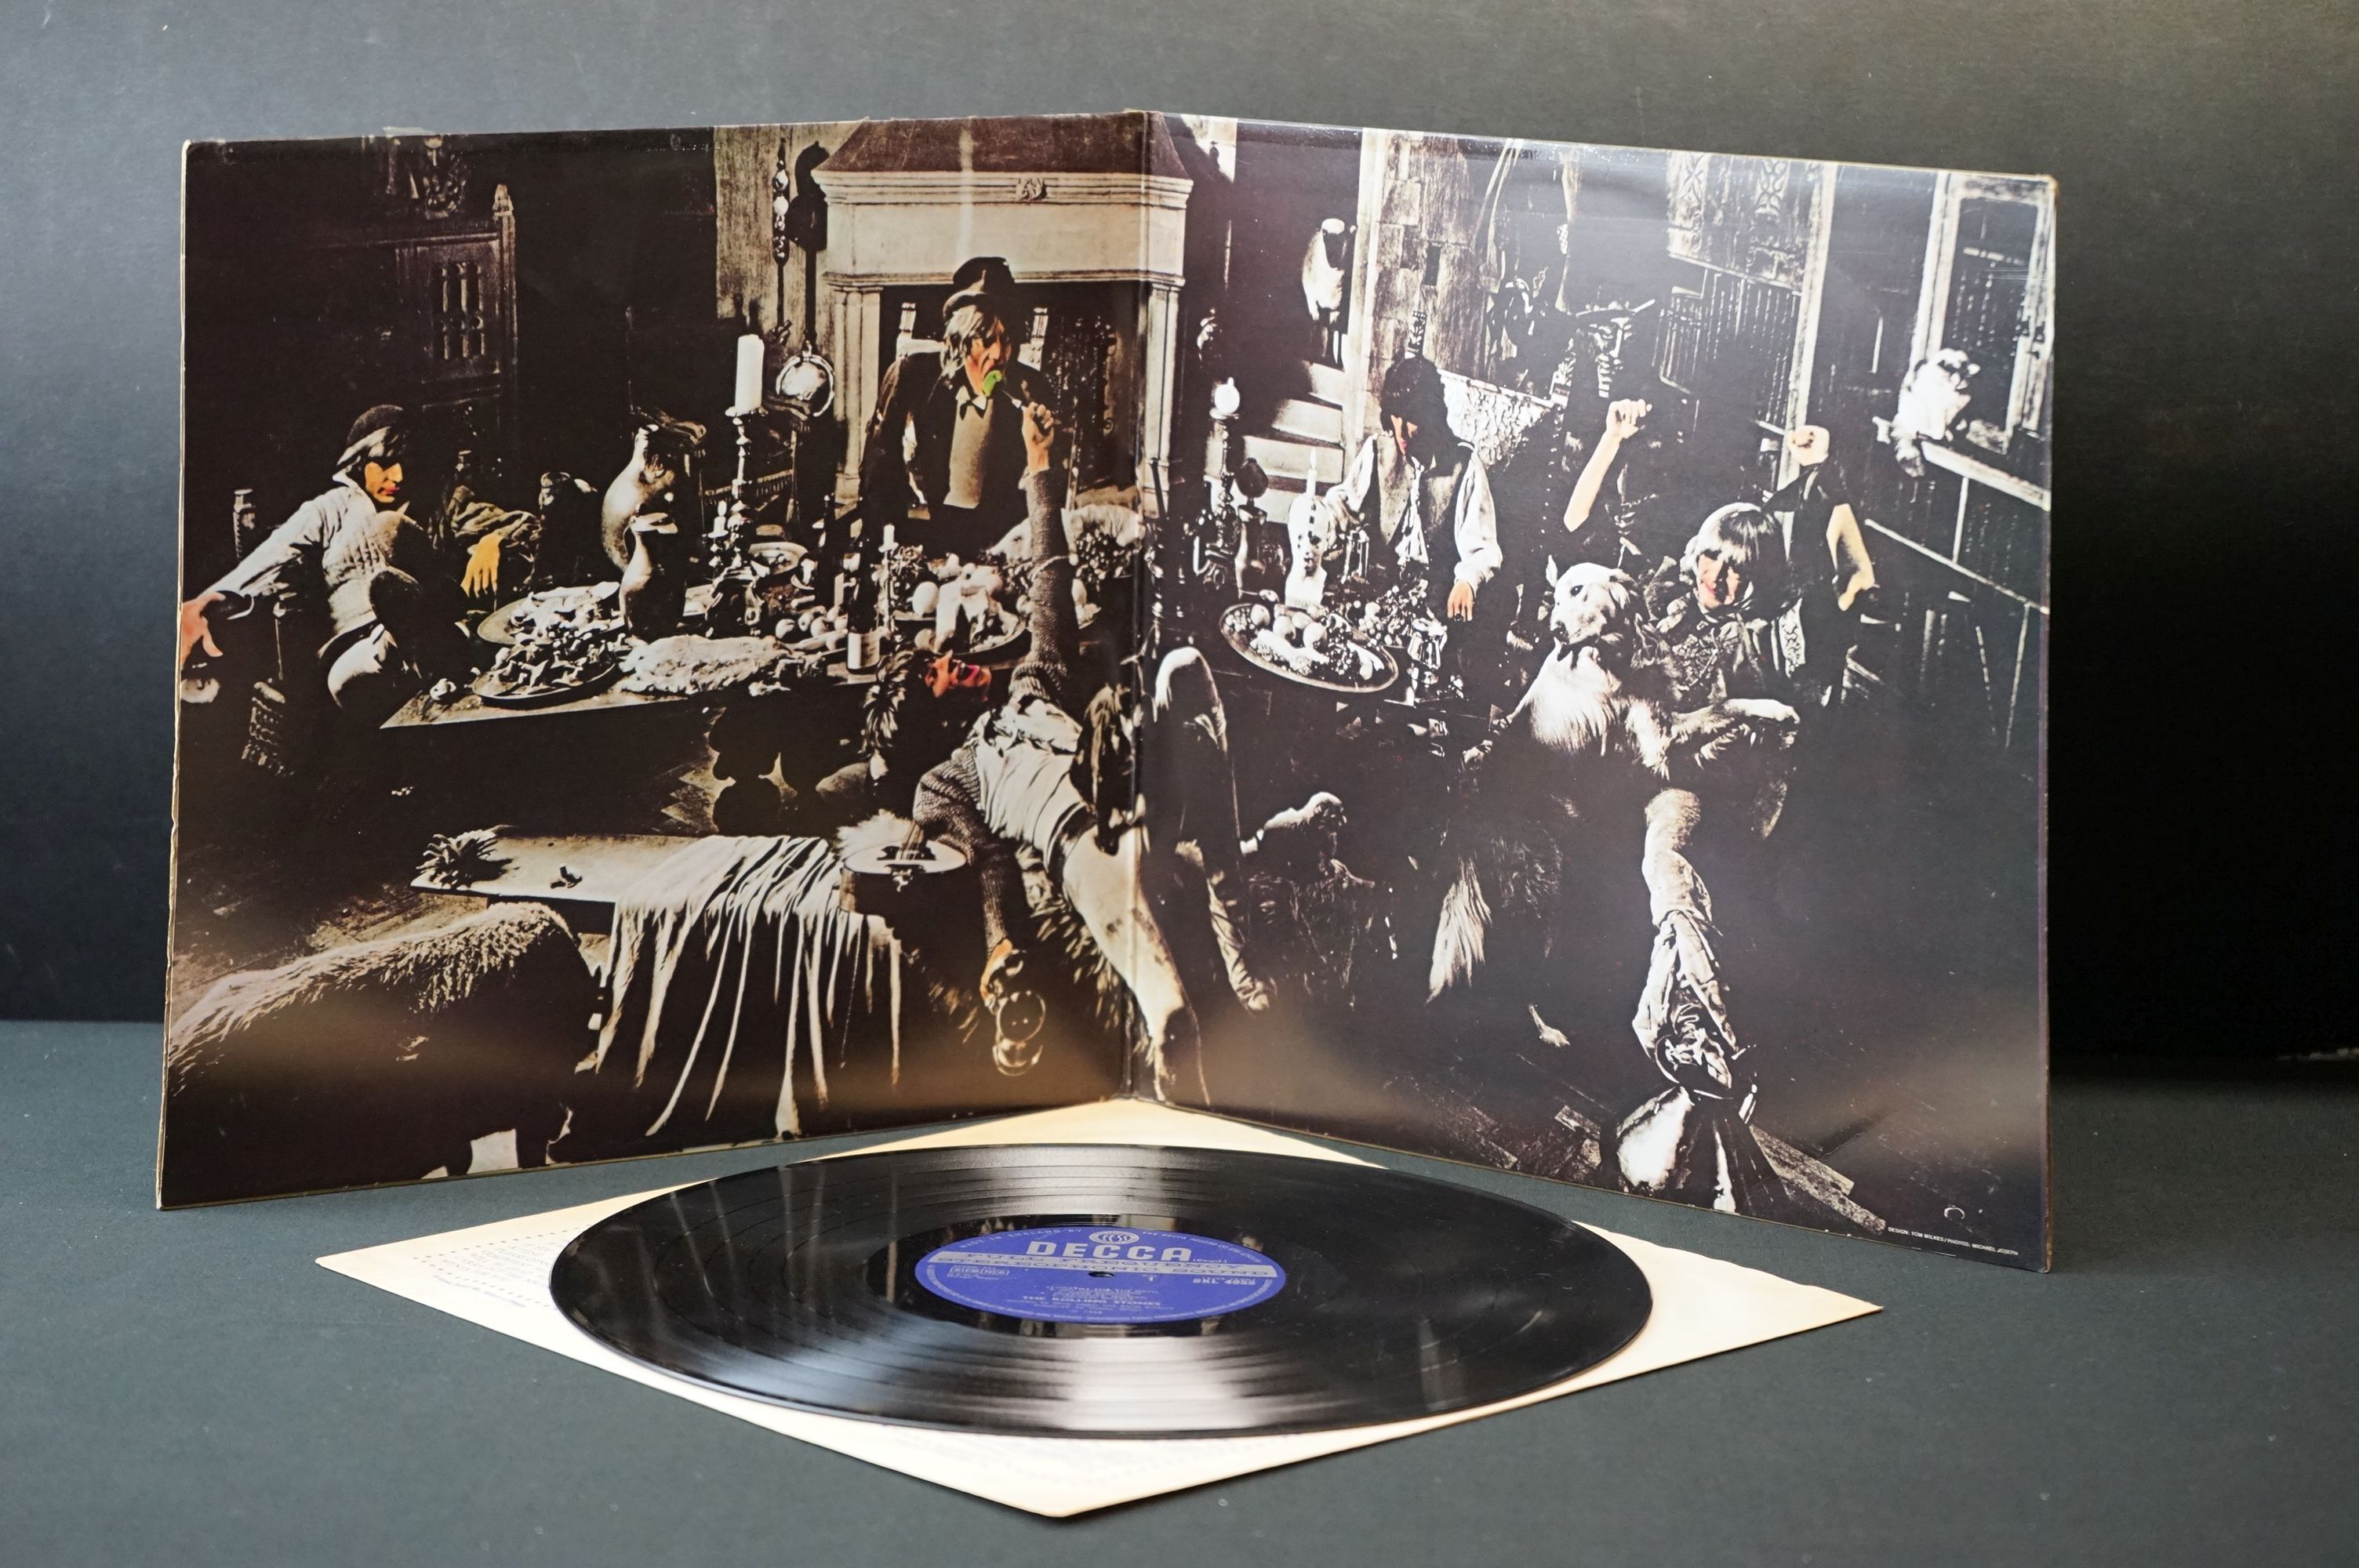 Vinyl - The Rolling Stones Beggars Banquet. Original UK 1st pressing Stereo copy with unboxed - Image 2 of 5